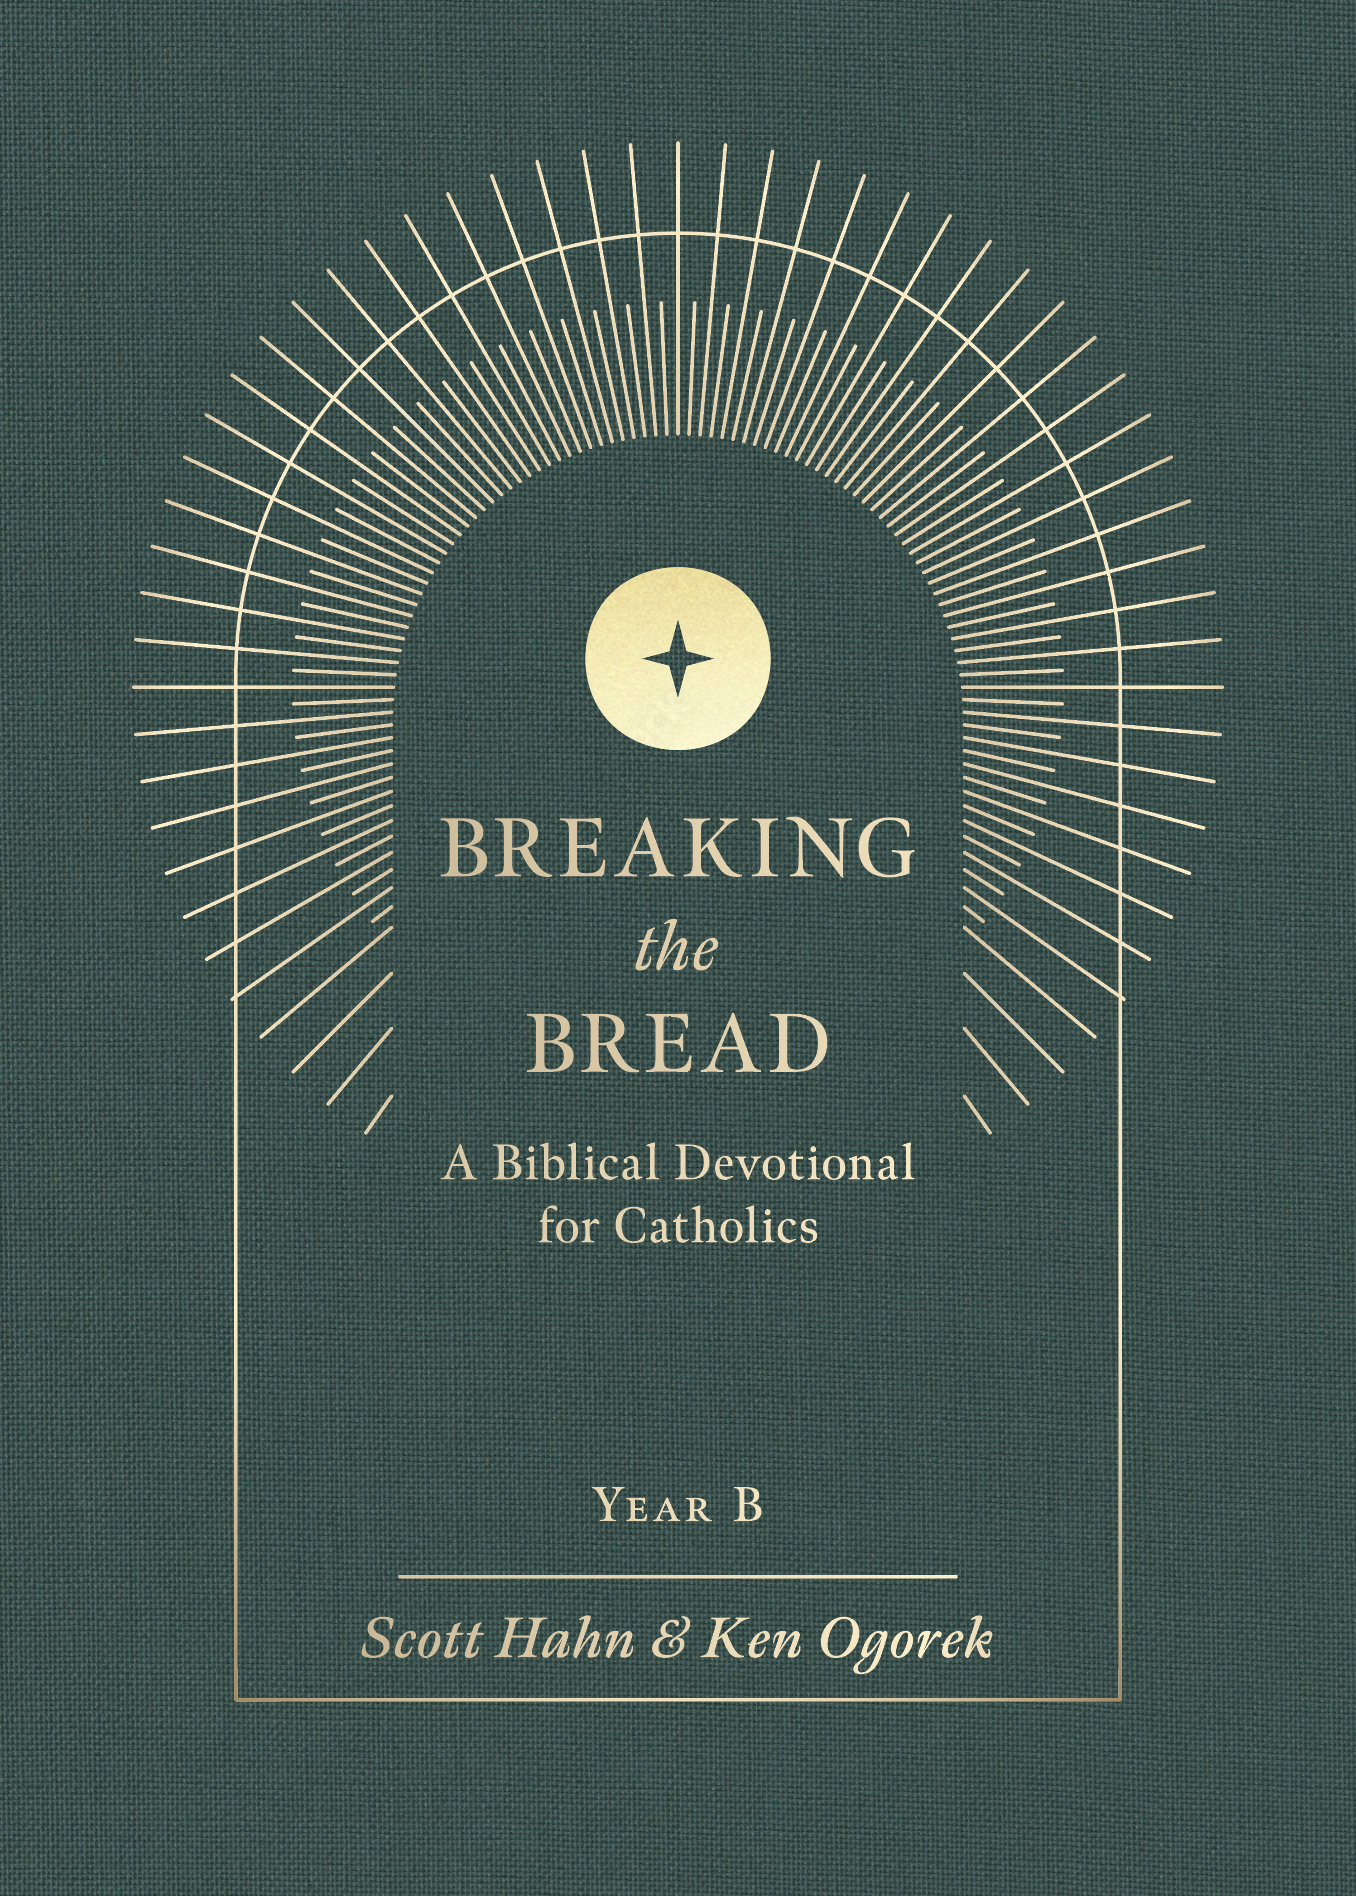 Biblical　Center　Catholics　Year　B　A　Bread:　–　Breaking　Devotional　St.　the　for　Paul